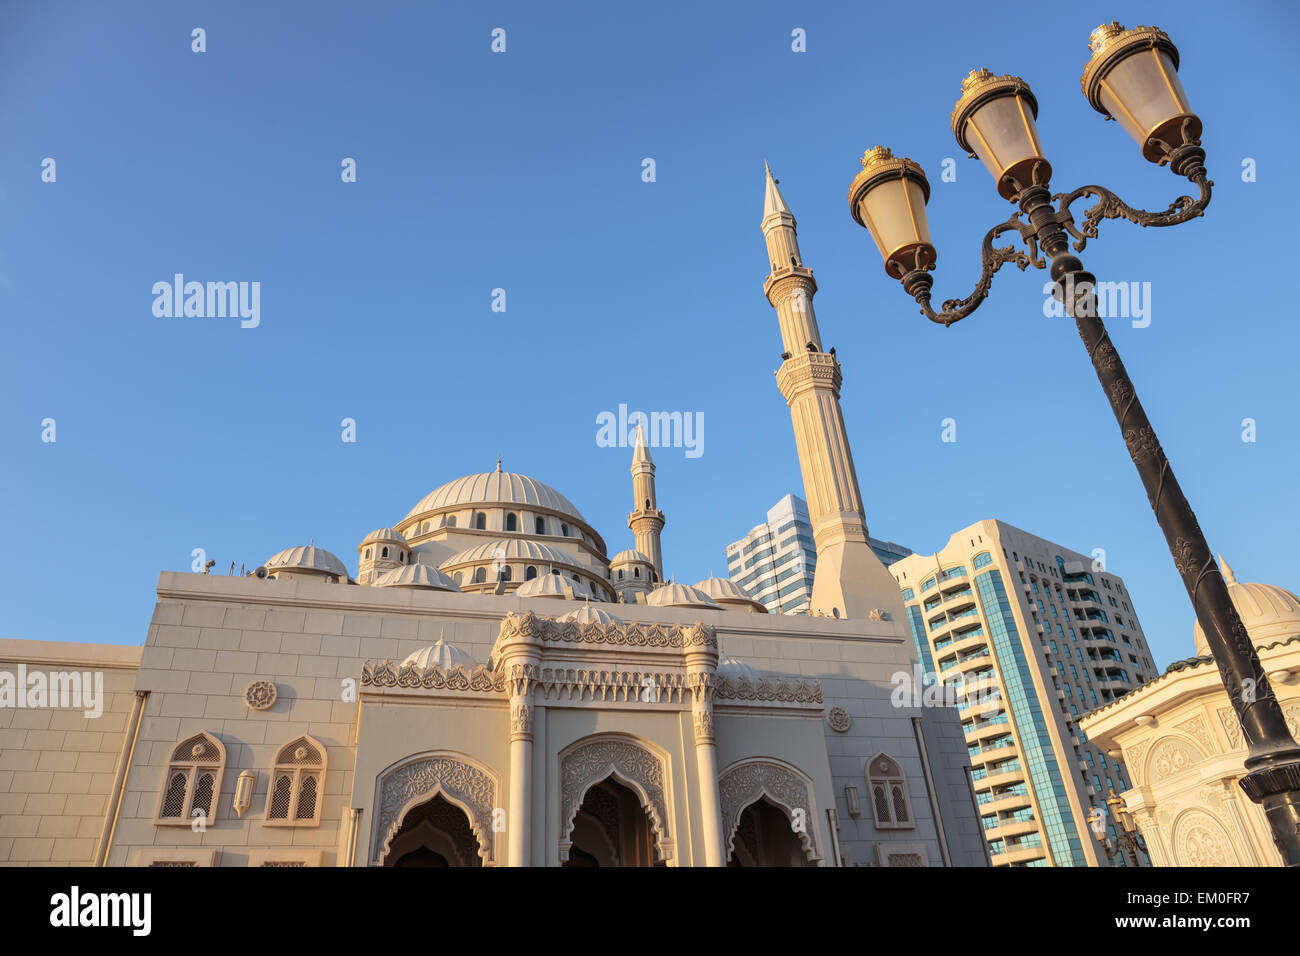 SHARJAH, UAE - NOVEMBER 6, 2013: Mosque at sunrise in Sharjah. It is the most industrialized emirate in UAE. Stock Photo